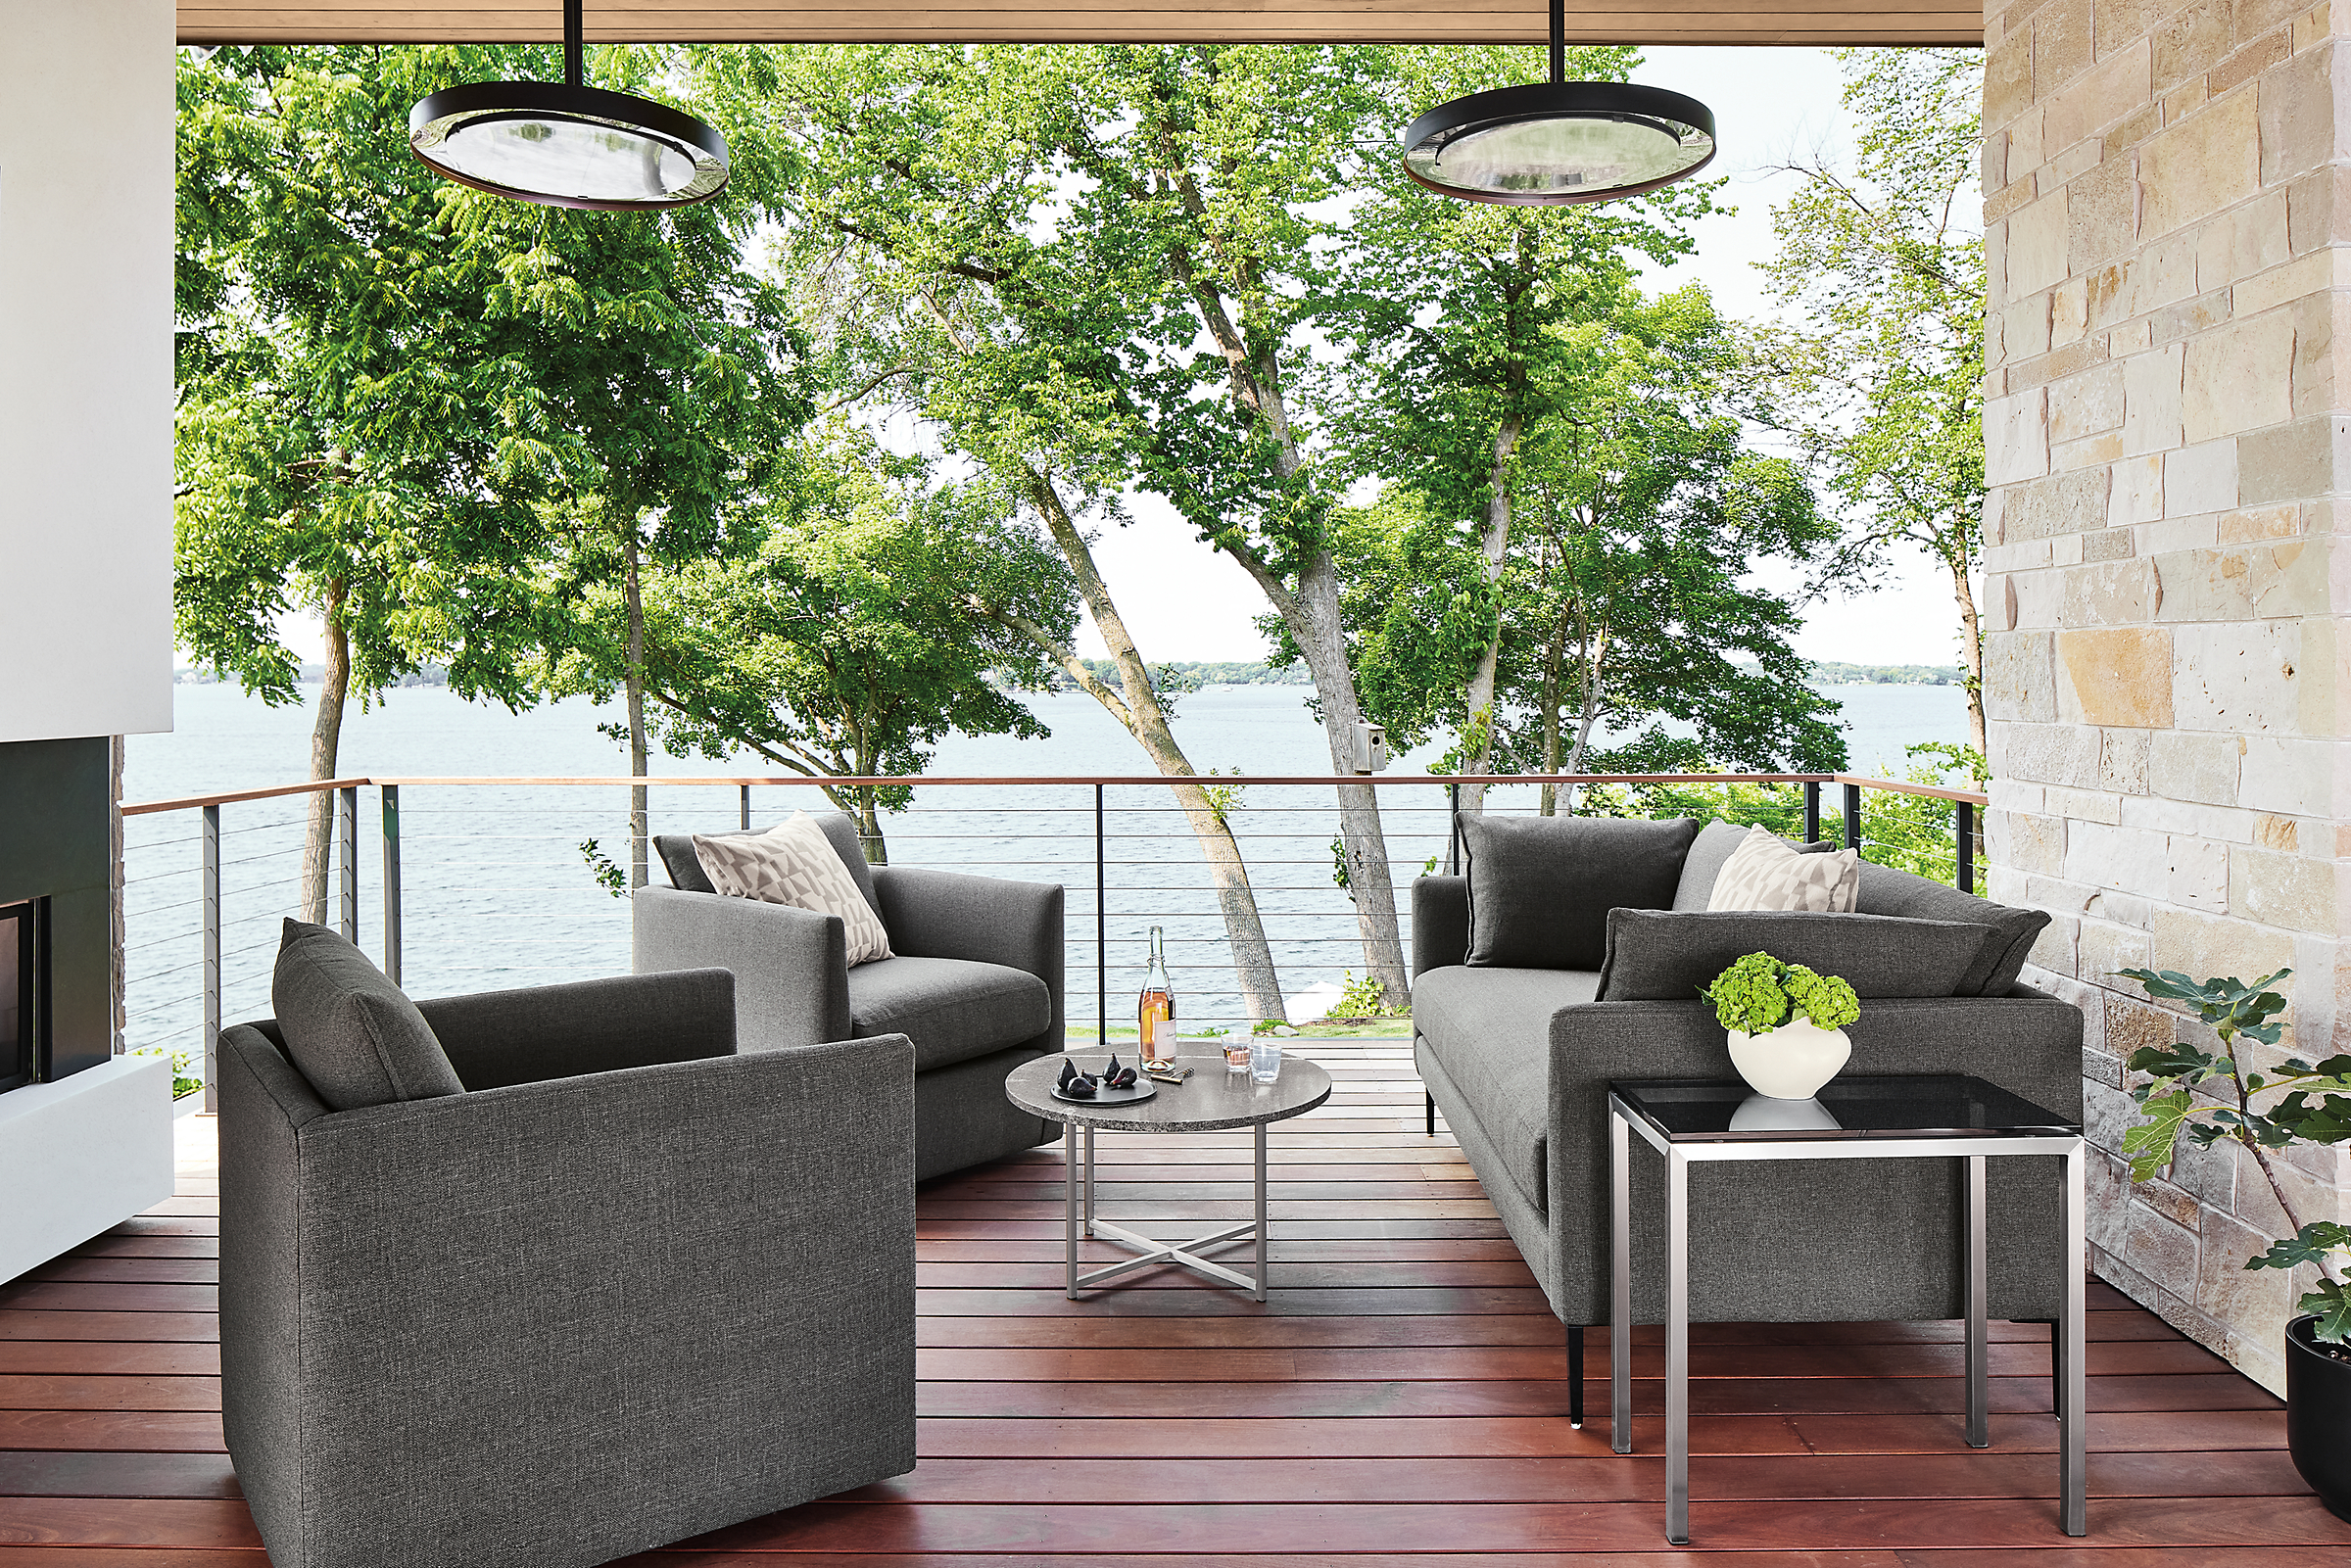 Outdoor space with palm sofa and palm swivel chairs in mist fabric.